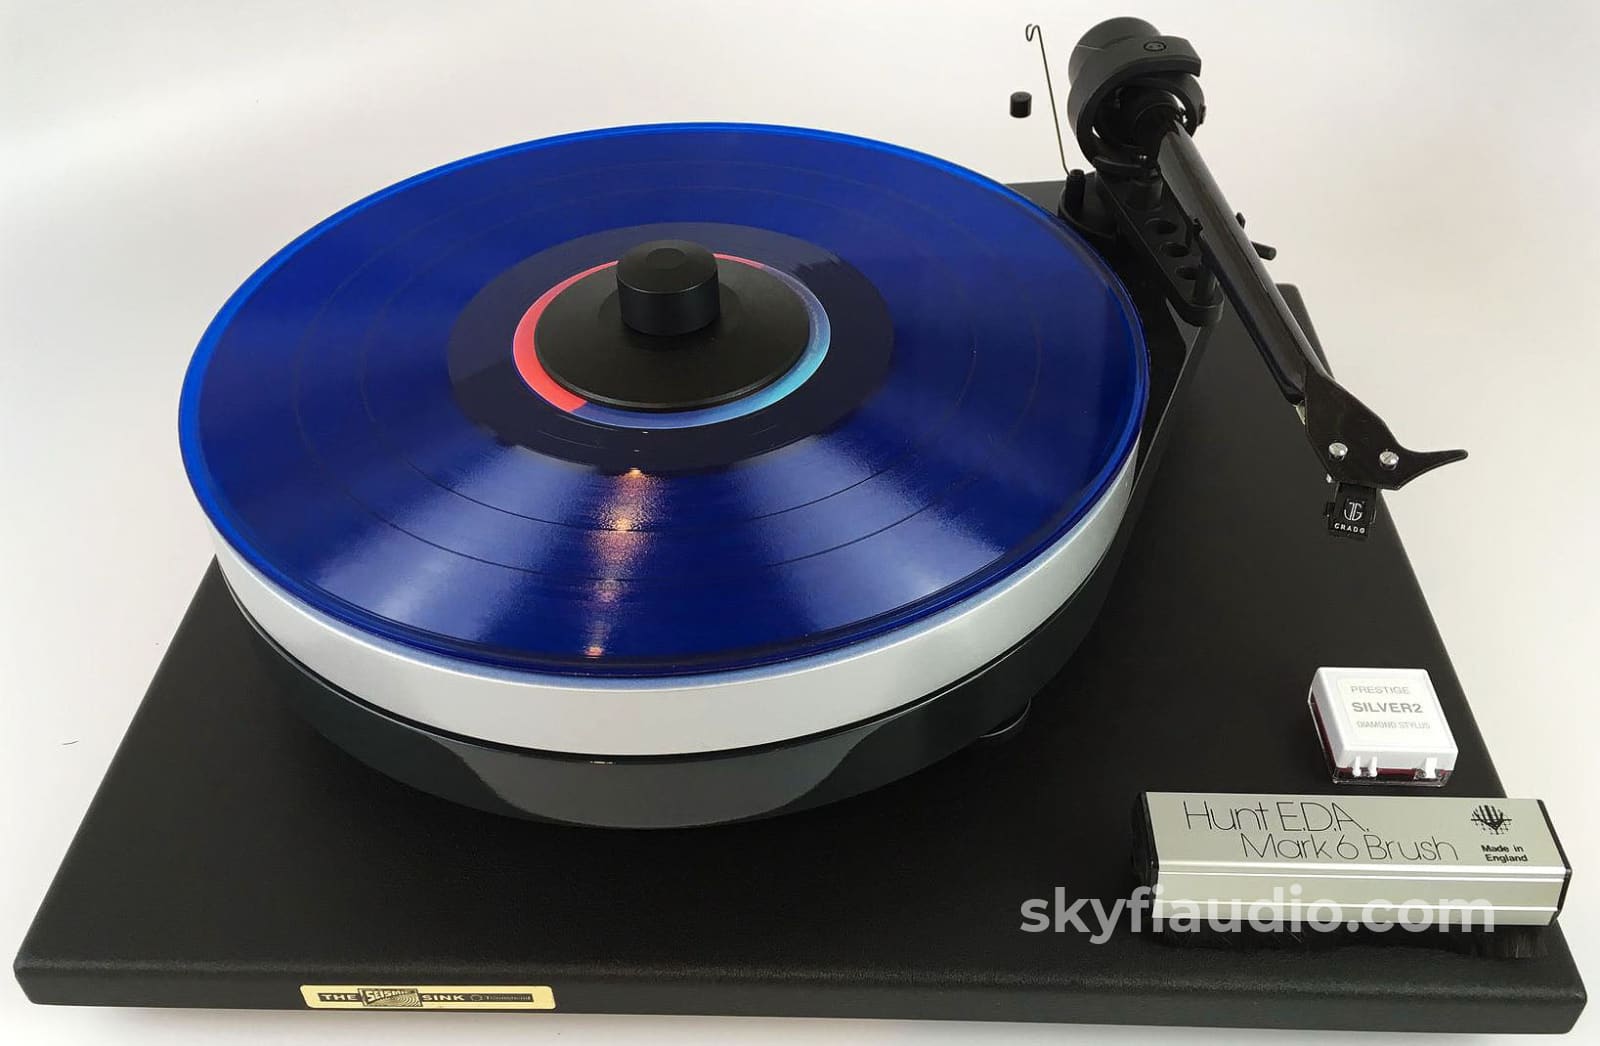 Pro-Ject Audio Rm-5 Se Turntable With New Grado Cartridge And Seismic Sink Base